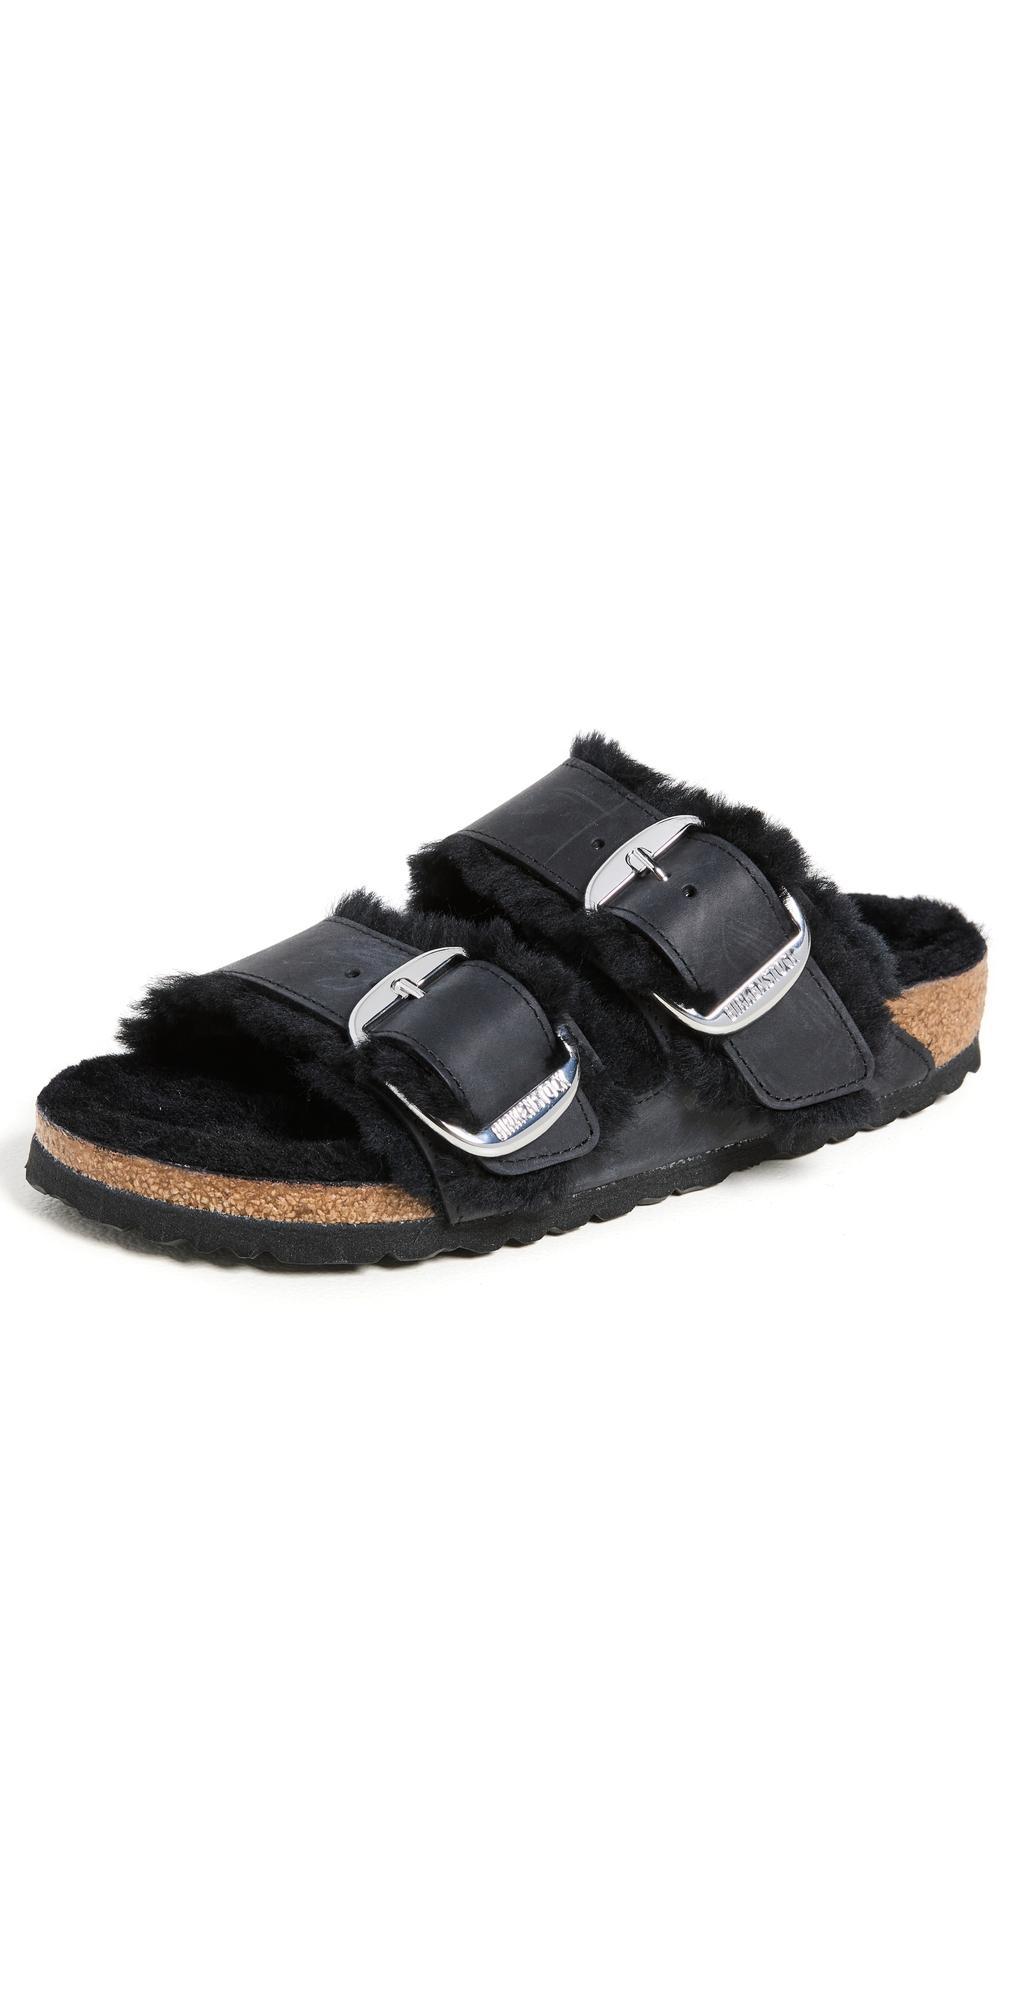 Womens Arizona Big Buckle Shearling-Lined Leather Sandals Product Image